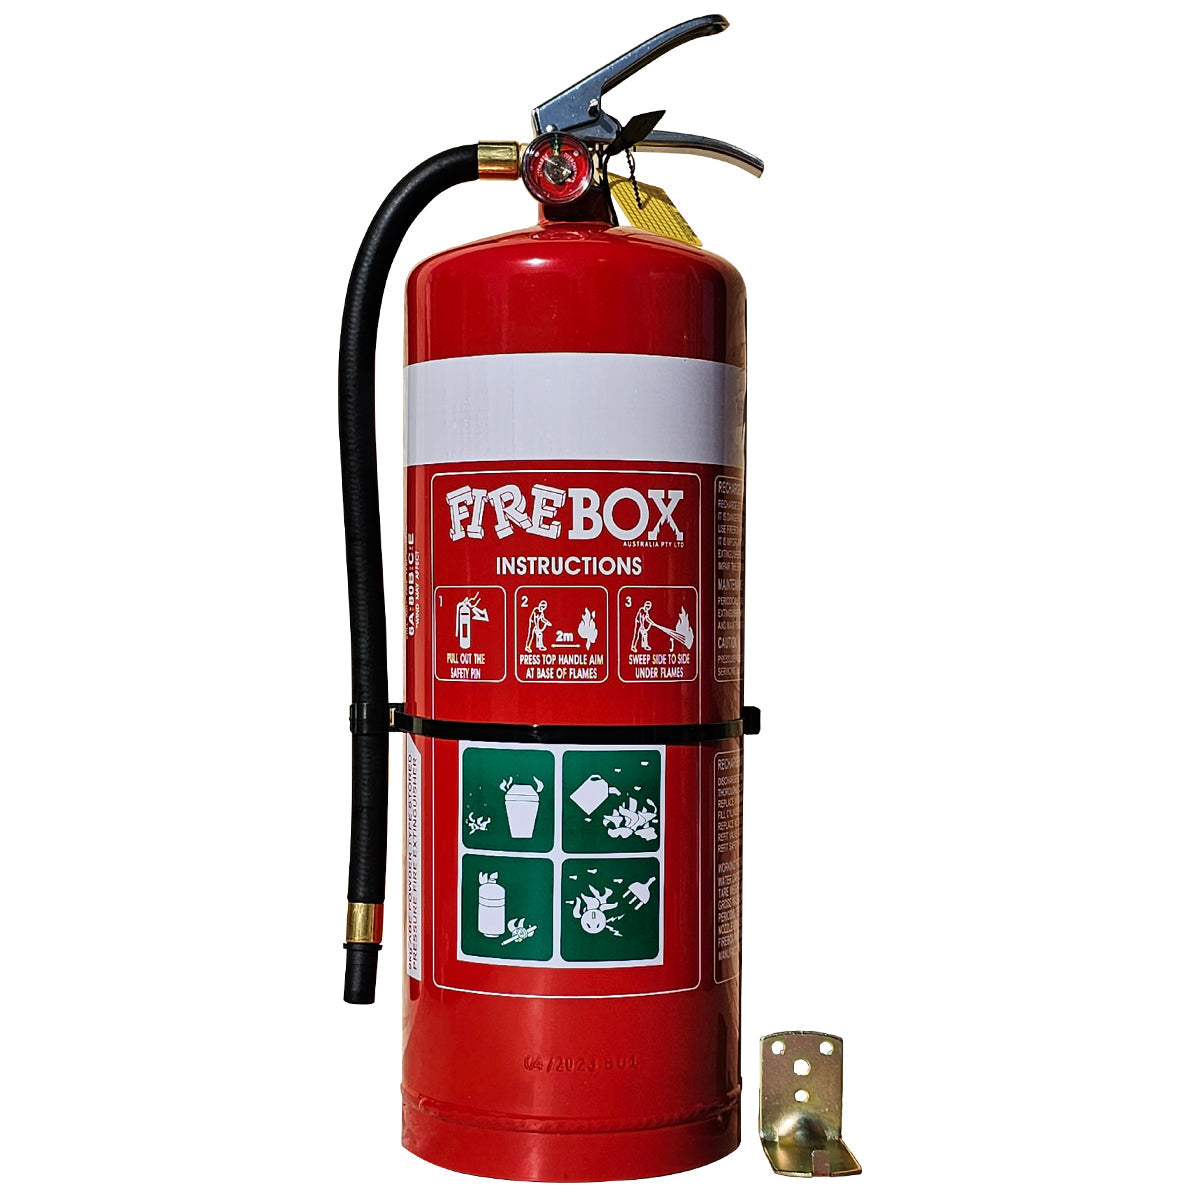 9kg High Performance Dry Chemical Powder Extinguisher with Split Pin - Premium ABE Extinguishers from Firebox - Shop now at Firebox Australia